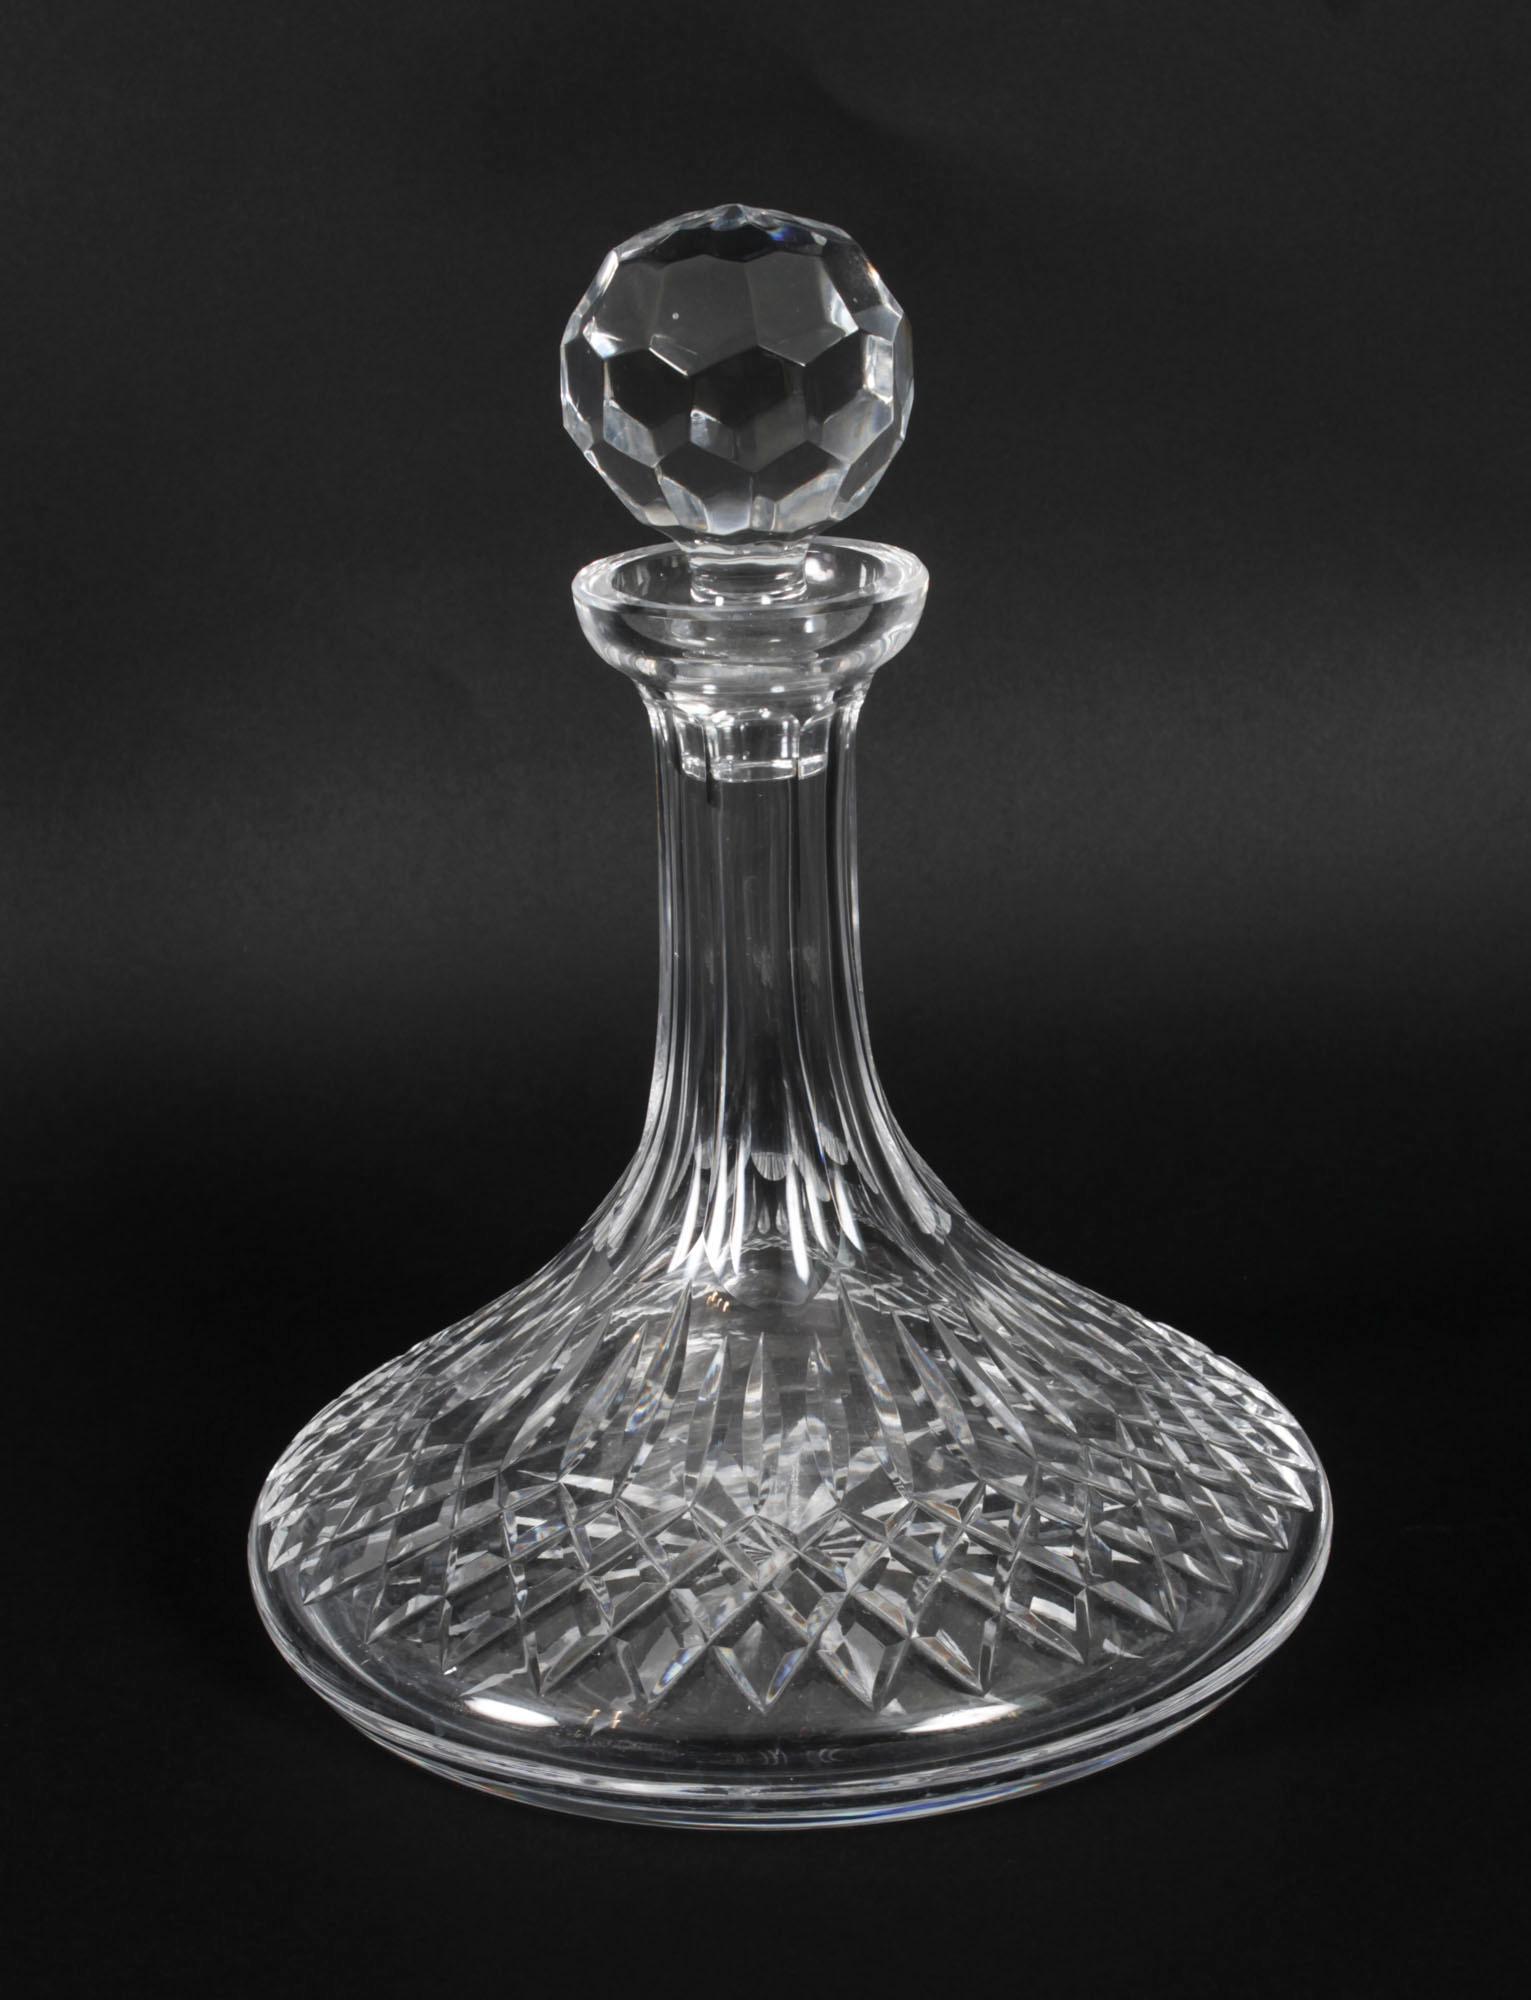 This is a beautiful pair of cut glass ship's decanters with faceted ball stoppers, dating from the mid 20th Century.

Add a touch of elegance to your next dining experience.

Condition:
In excellent condition, please see photos for